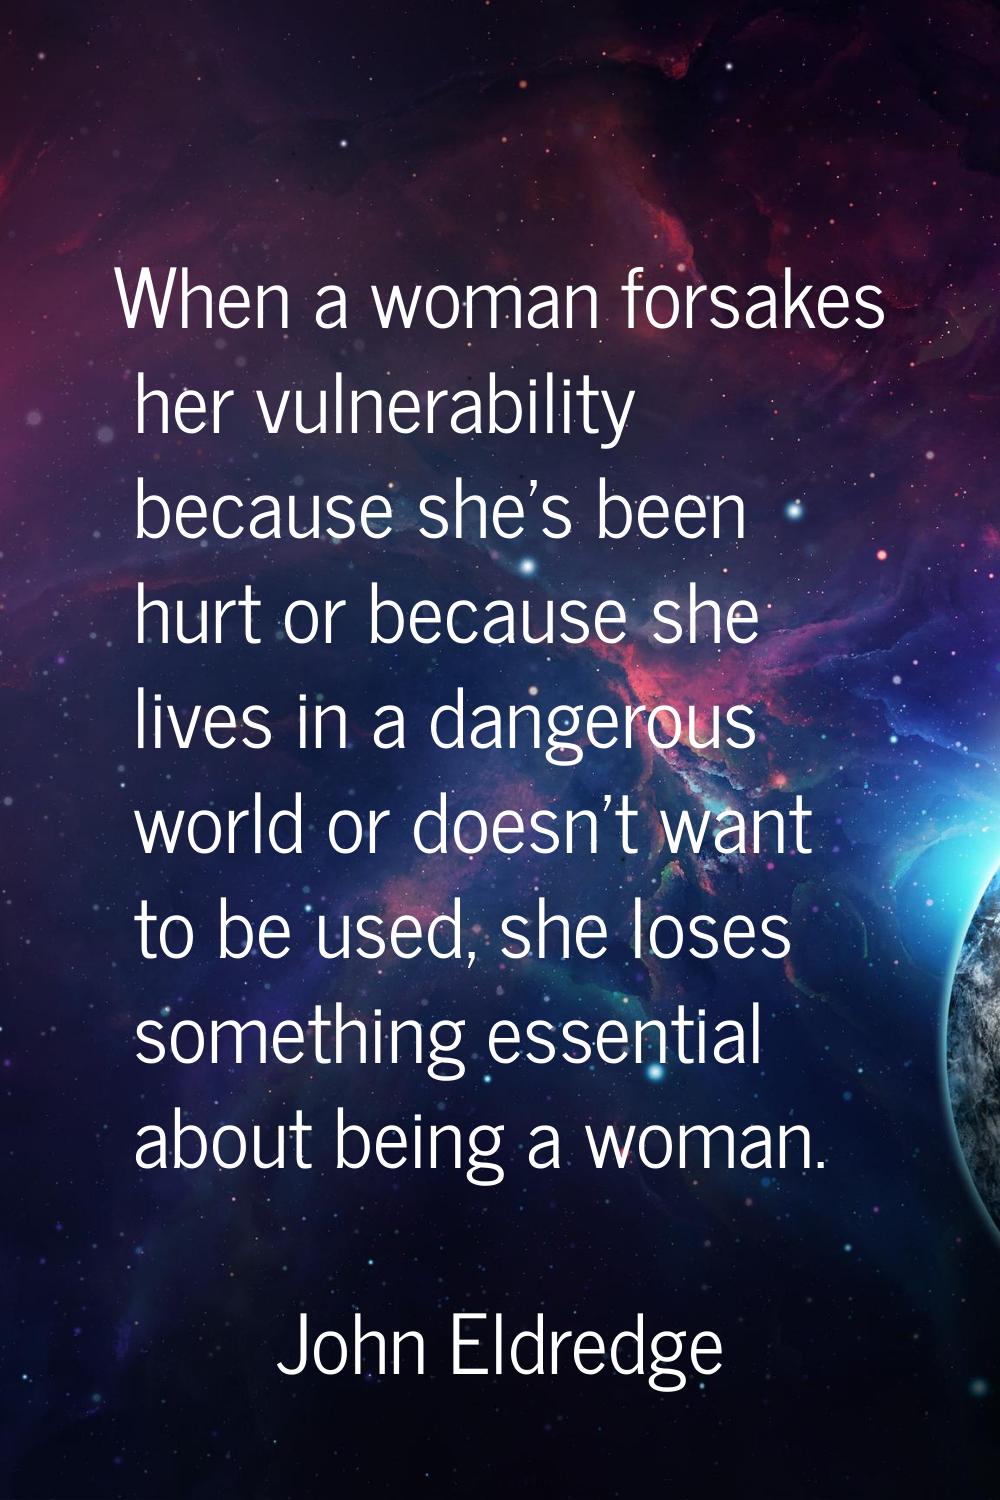 When a woman forsakes her vulnerability because she's been hurt or because she lives in a dangerous